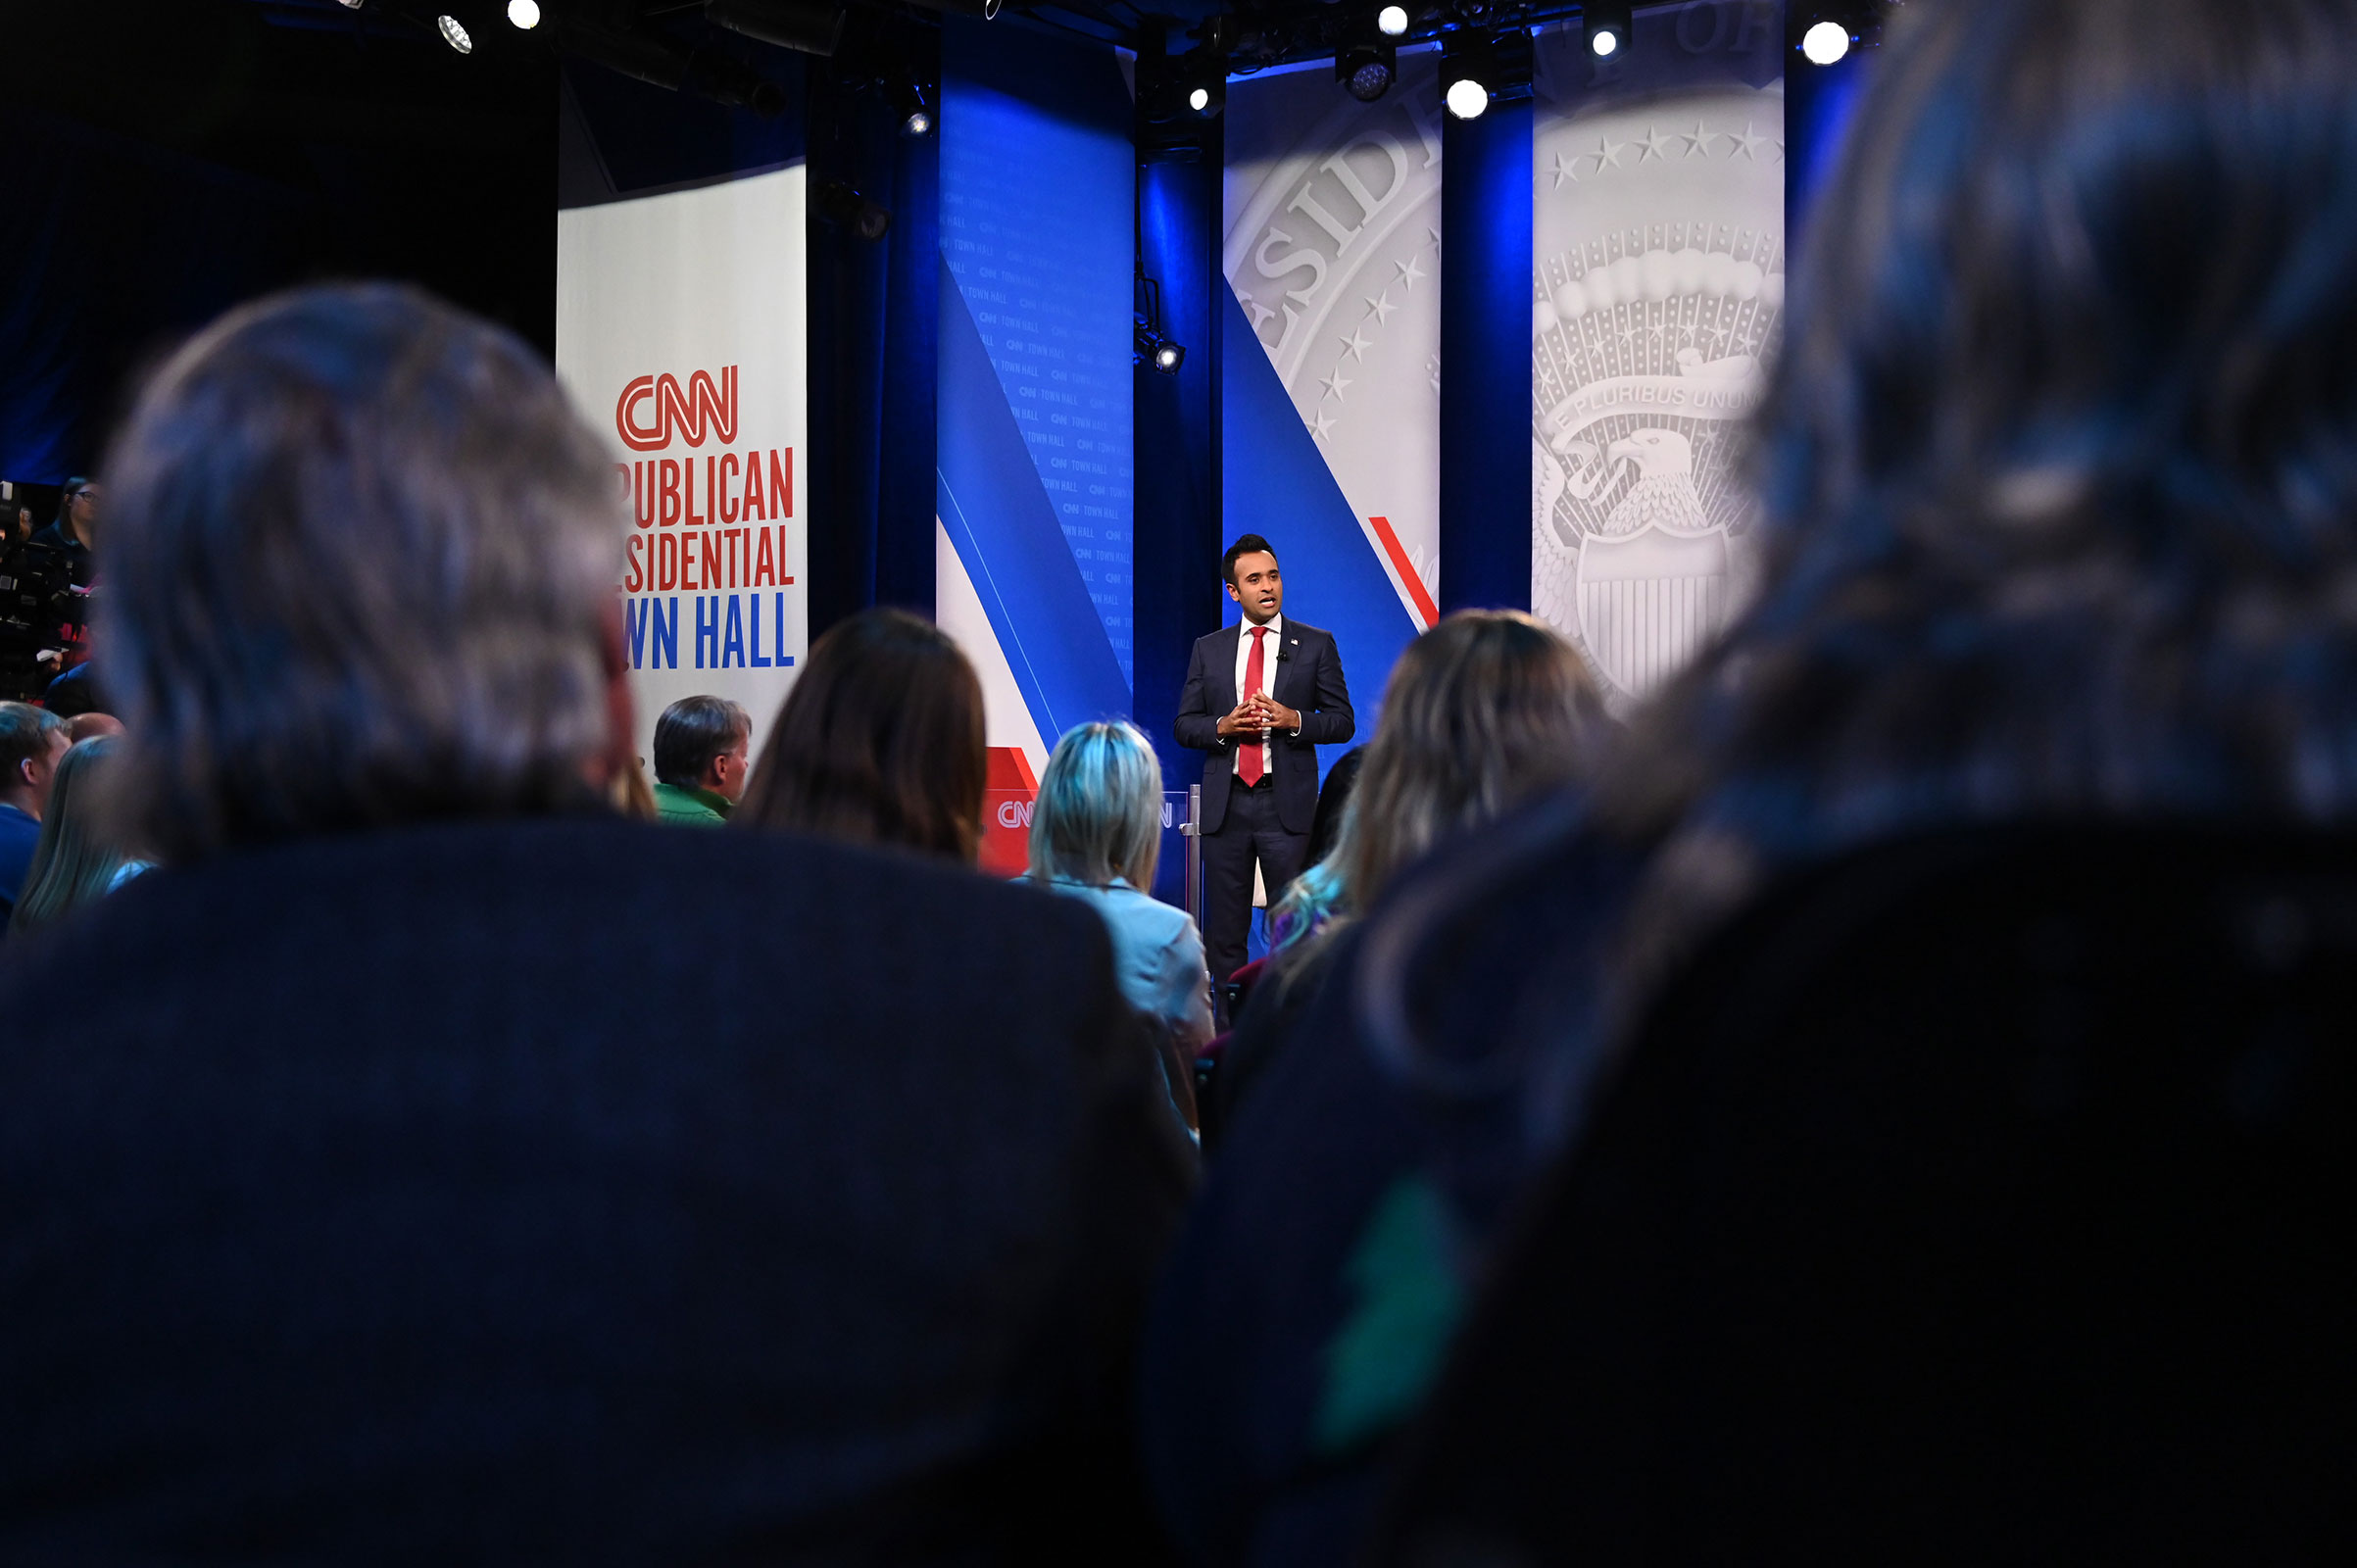 Republican presidential candidate Vivek Ramaswamy participates in a CNN Republican Town Hall moderated by CNN’s Abby Phillip at Grand View University in Des Moines, Iowa, on Wednesday, December 13.